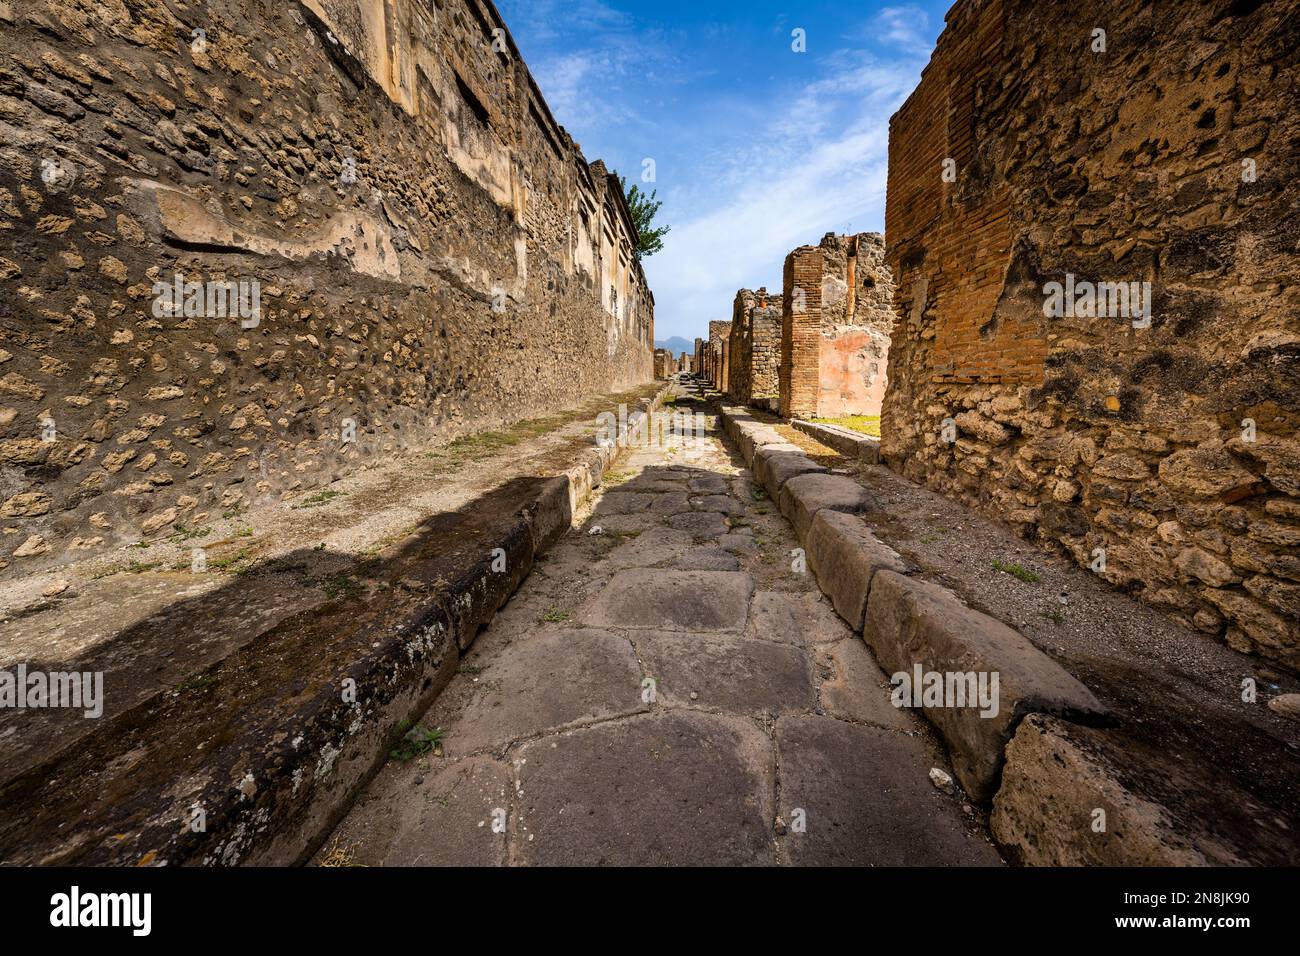 Street in the ruins of the ancient Roman city of Pompeii Stock Photo